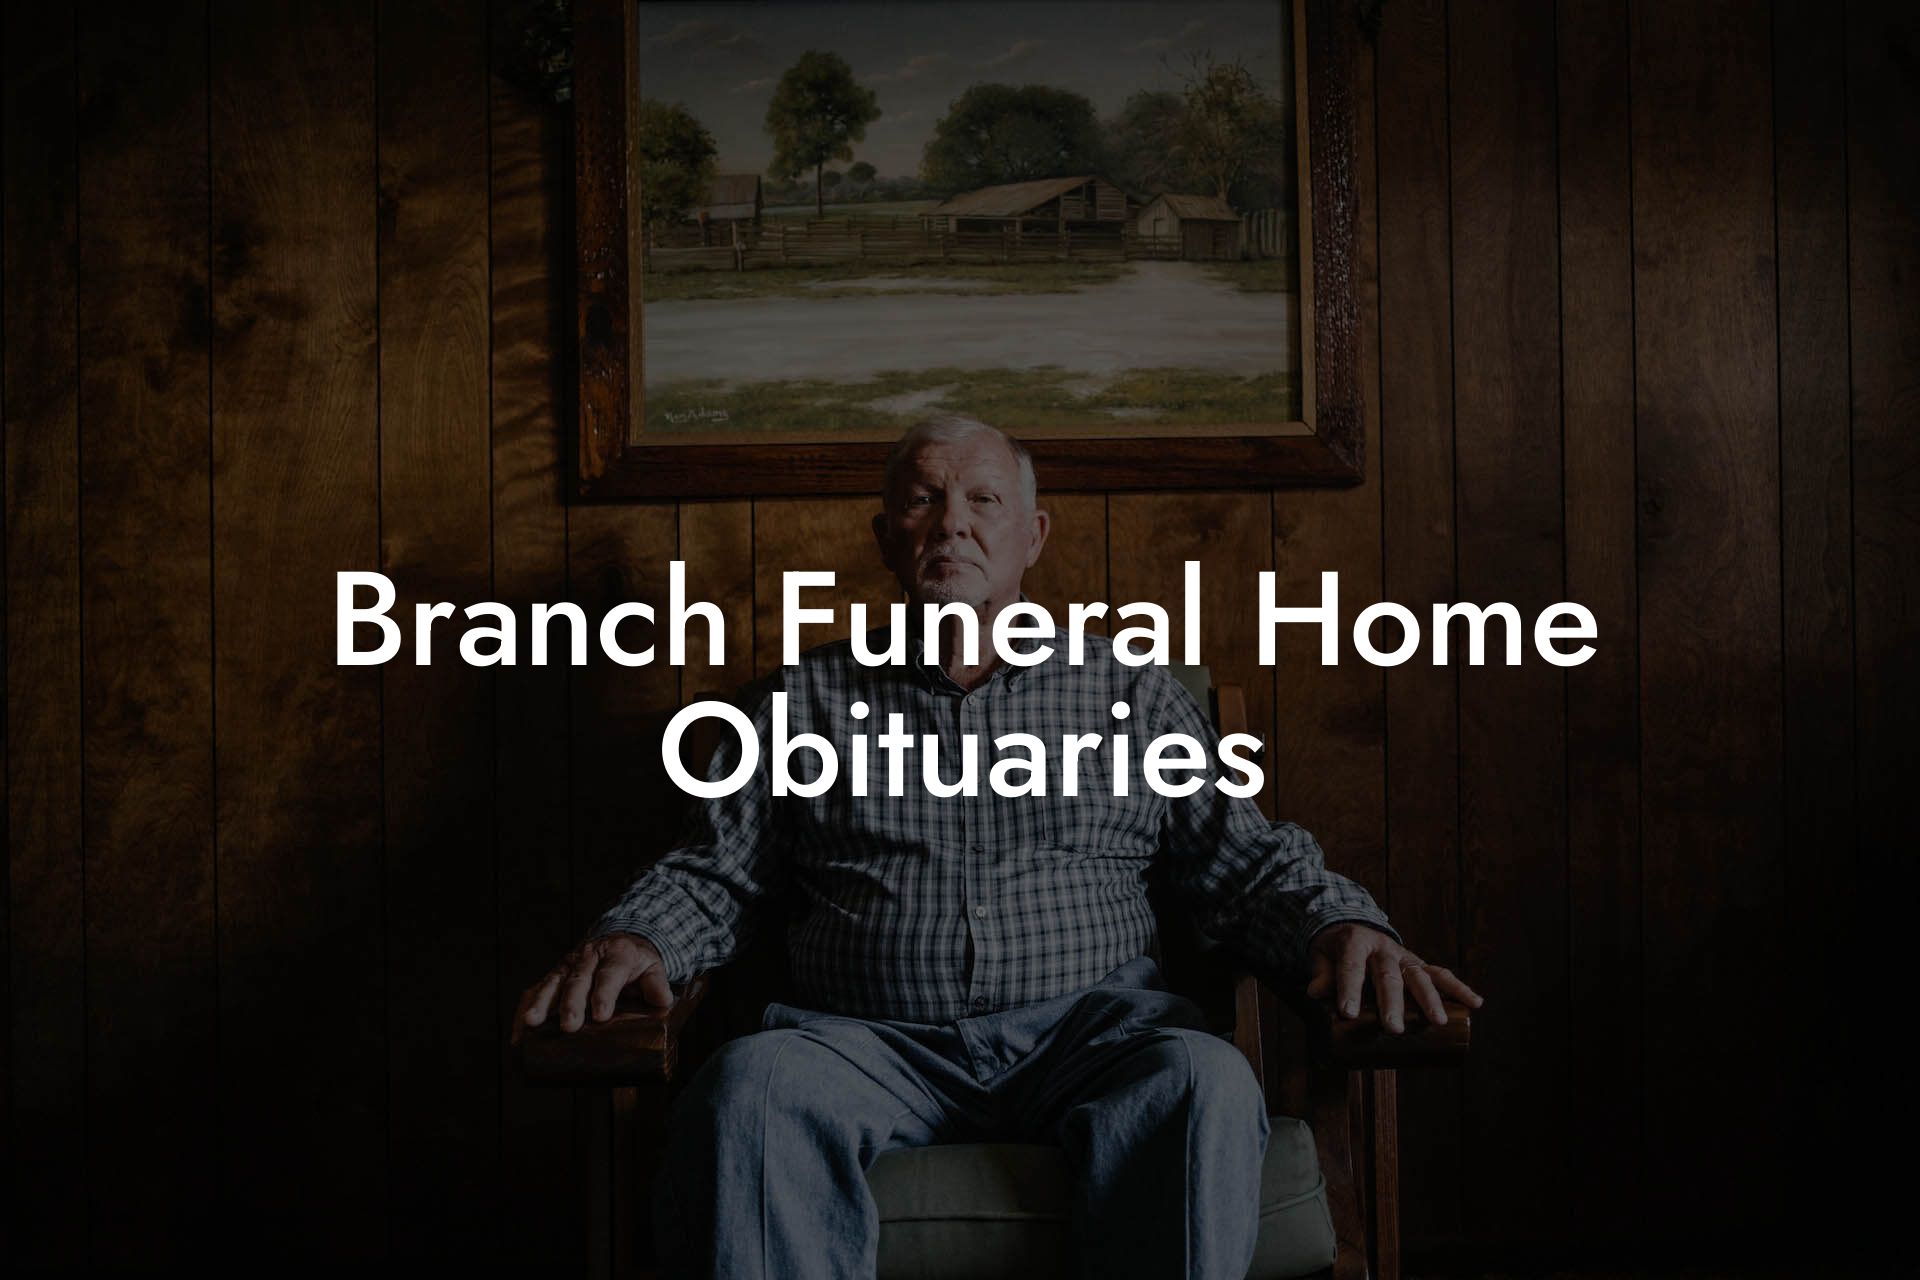 Branch Funeral Home Obituaries